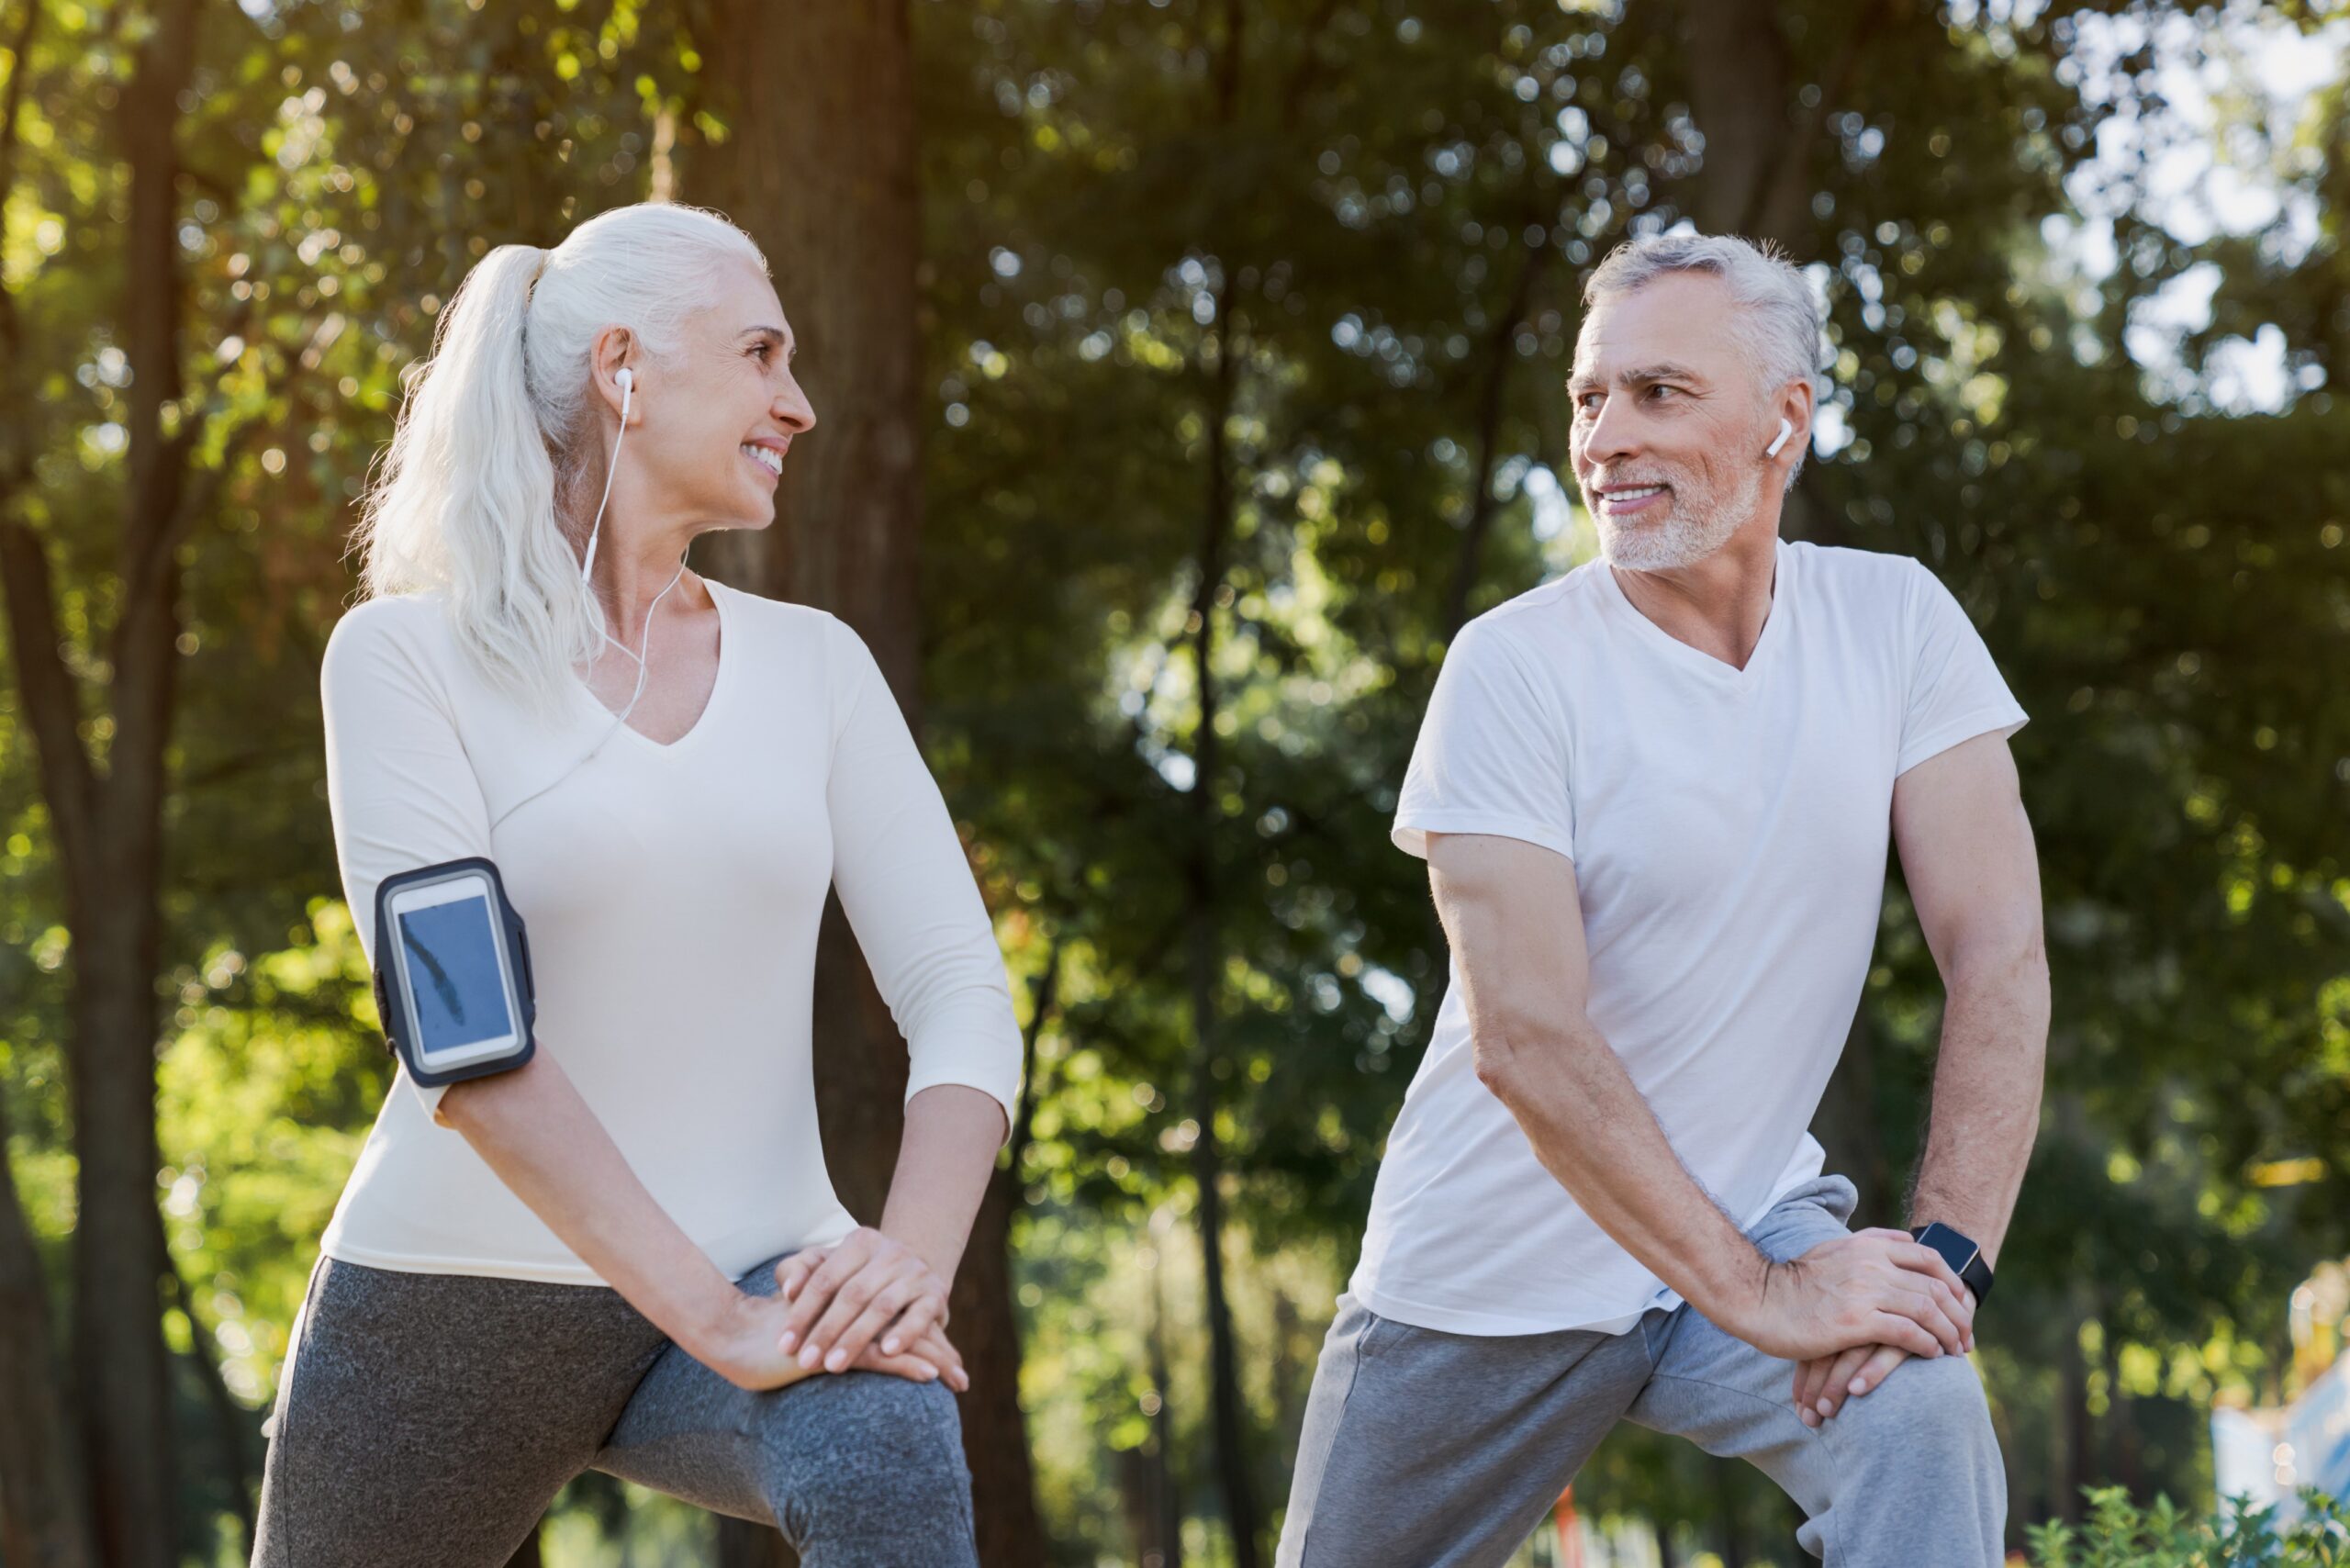 Brain Function Boosted by Daily Physical Activity in Middle-Aged, Older Adults